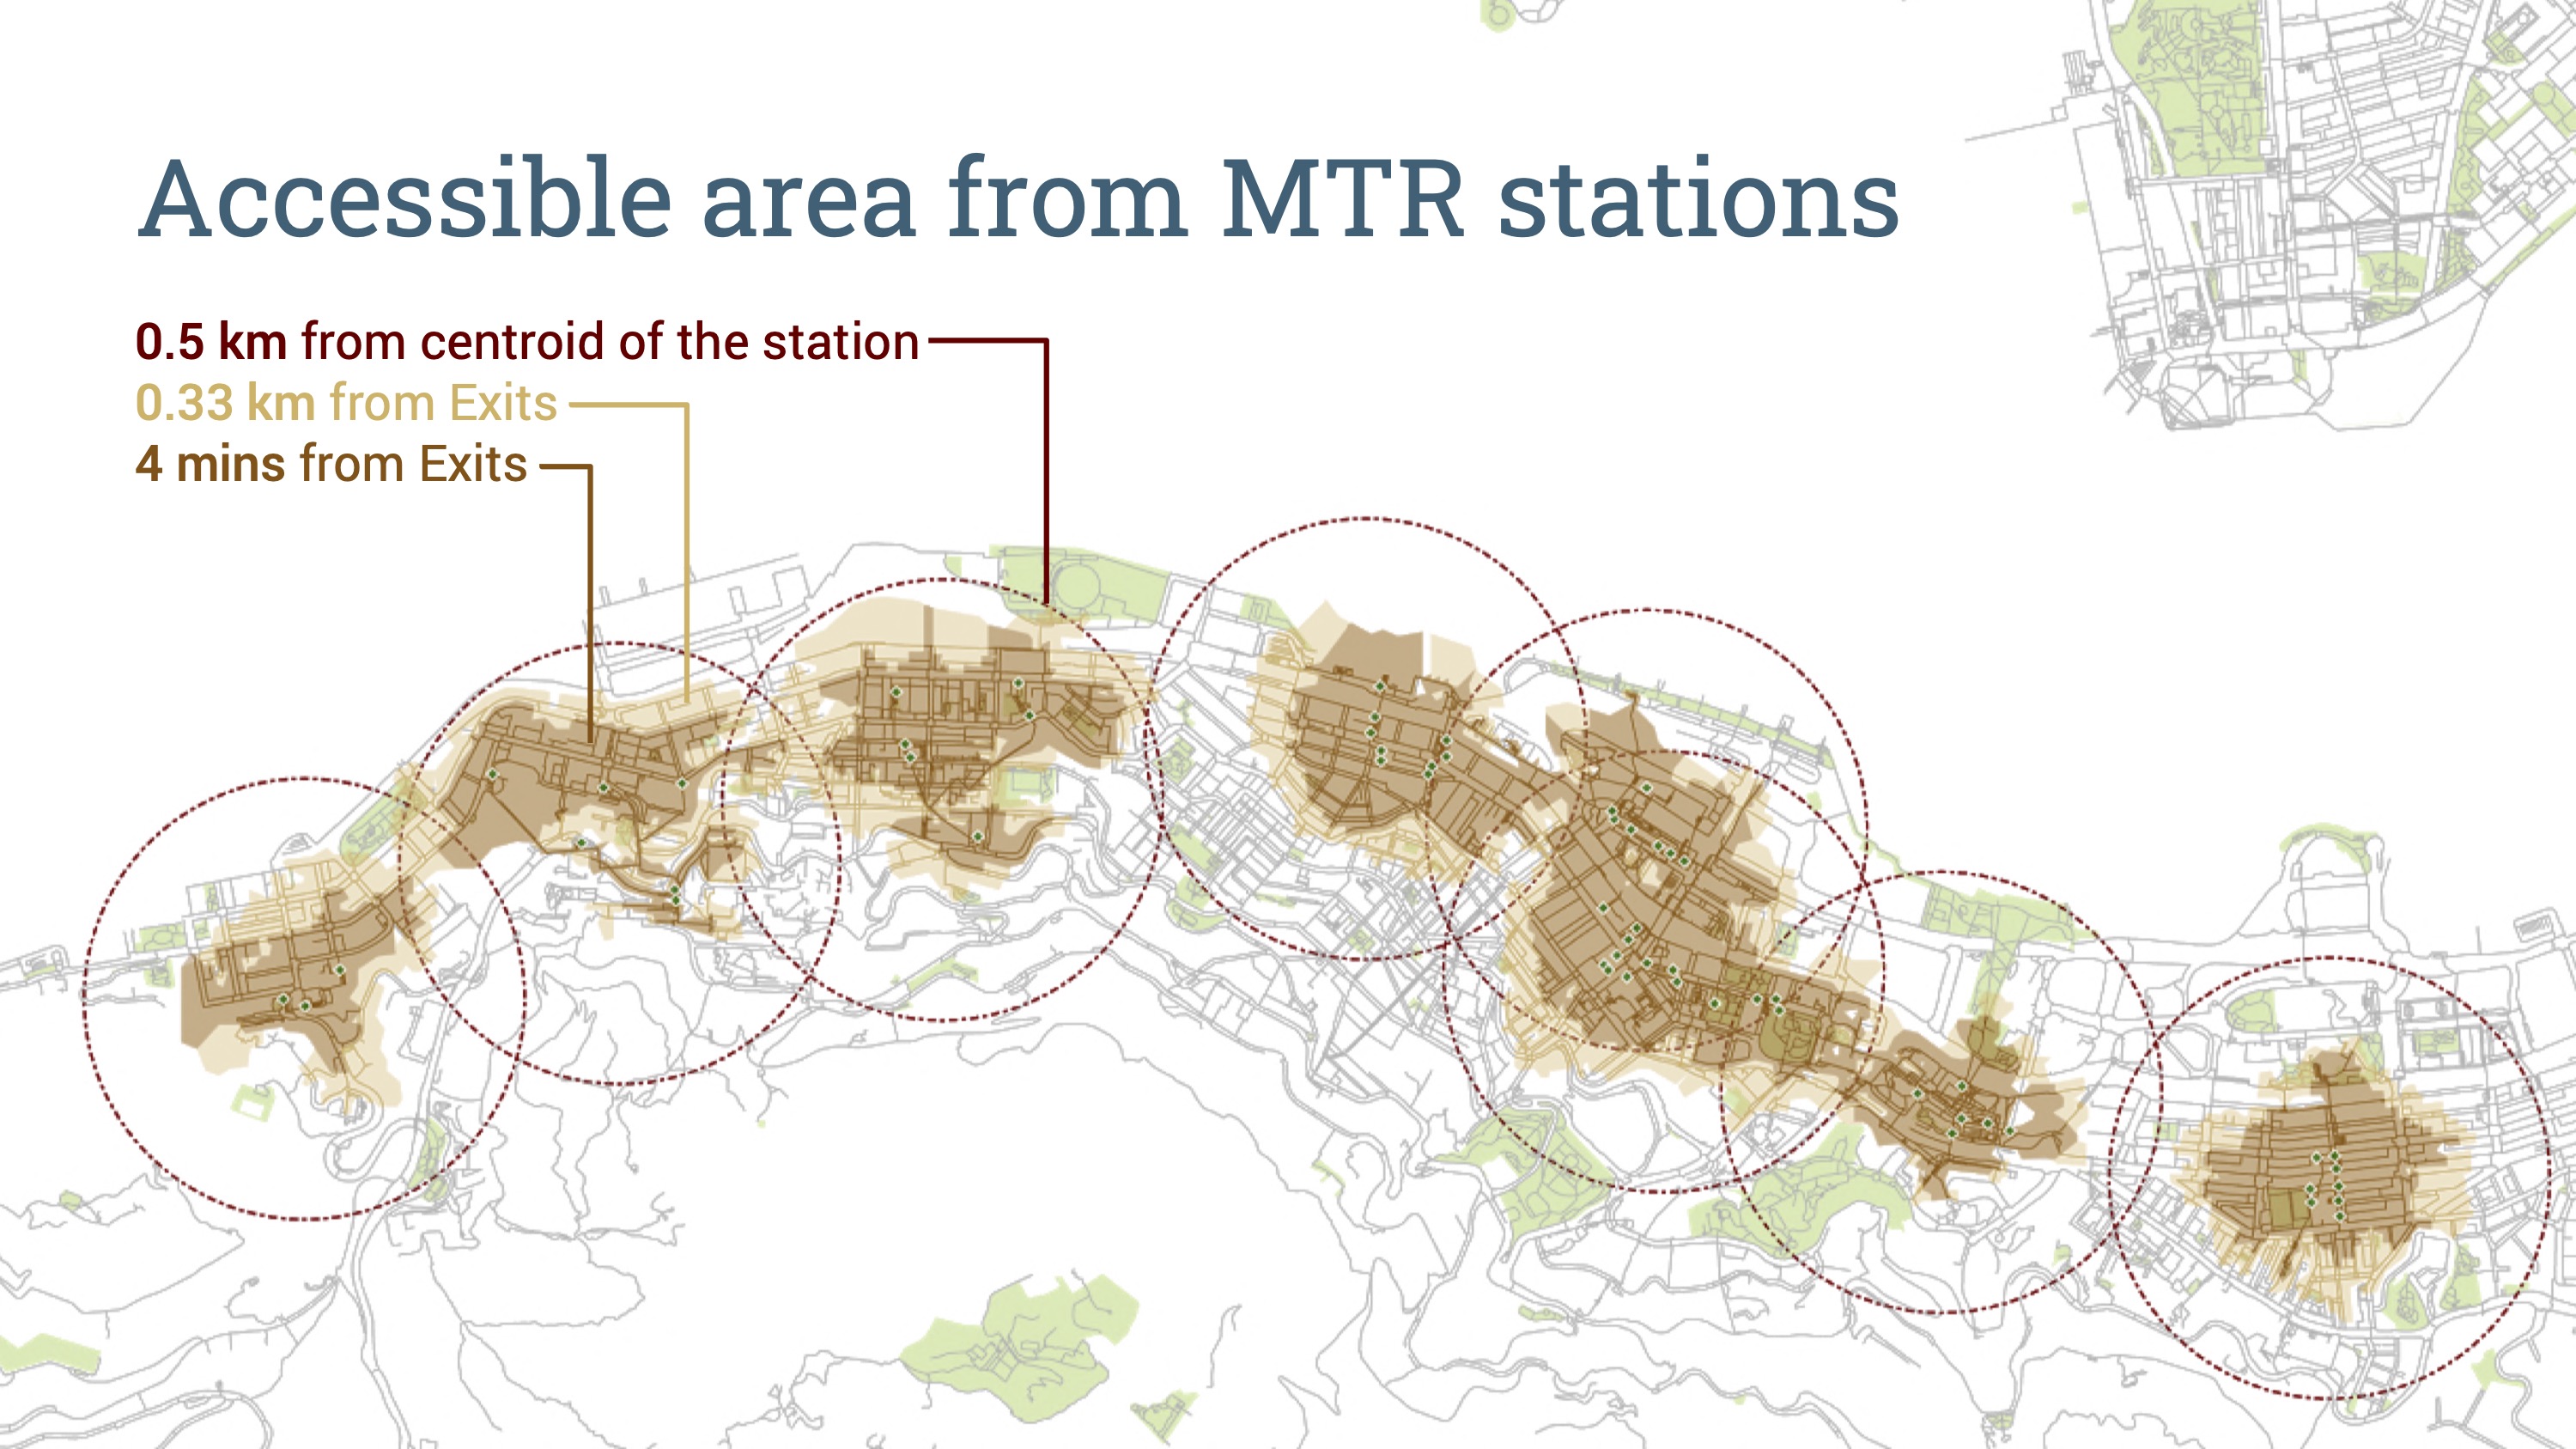 Comparing the reachable area from MTR station exits between WAAT and traditional methods